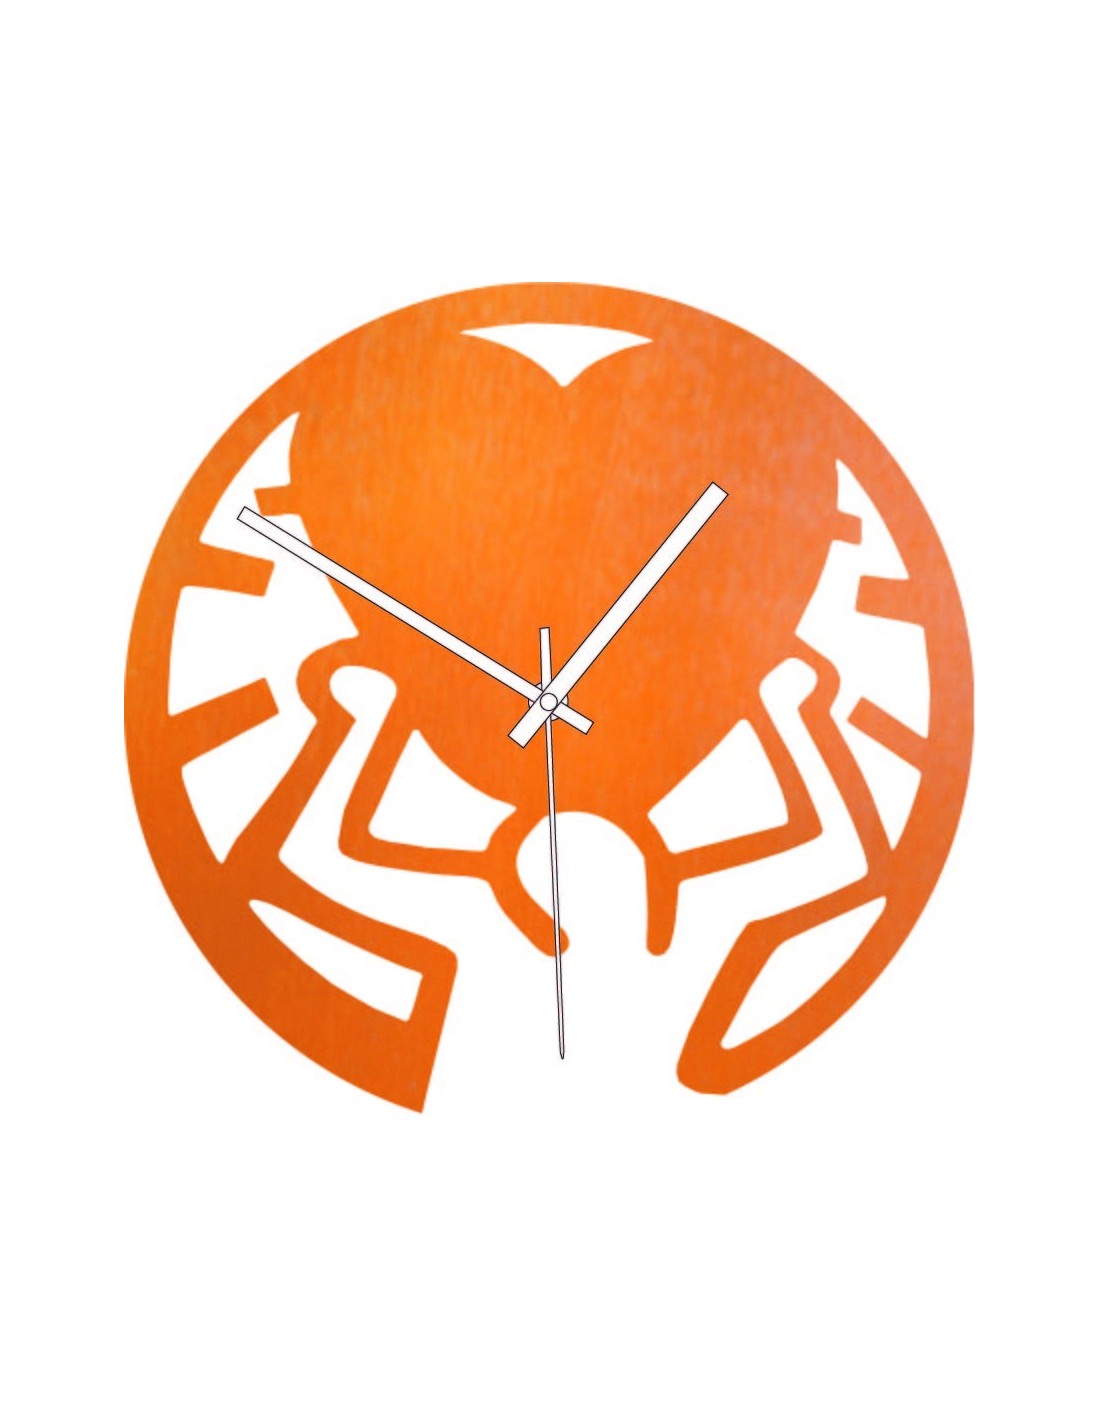 Laser Cut Heart Wall Clock DXF File for Laser Cutting